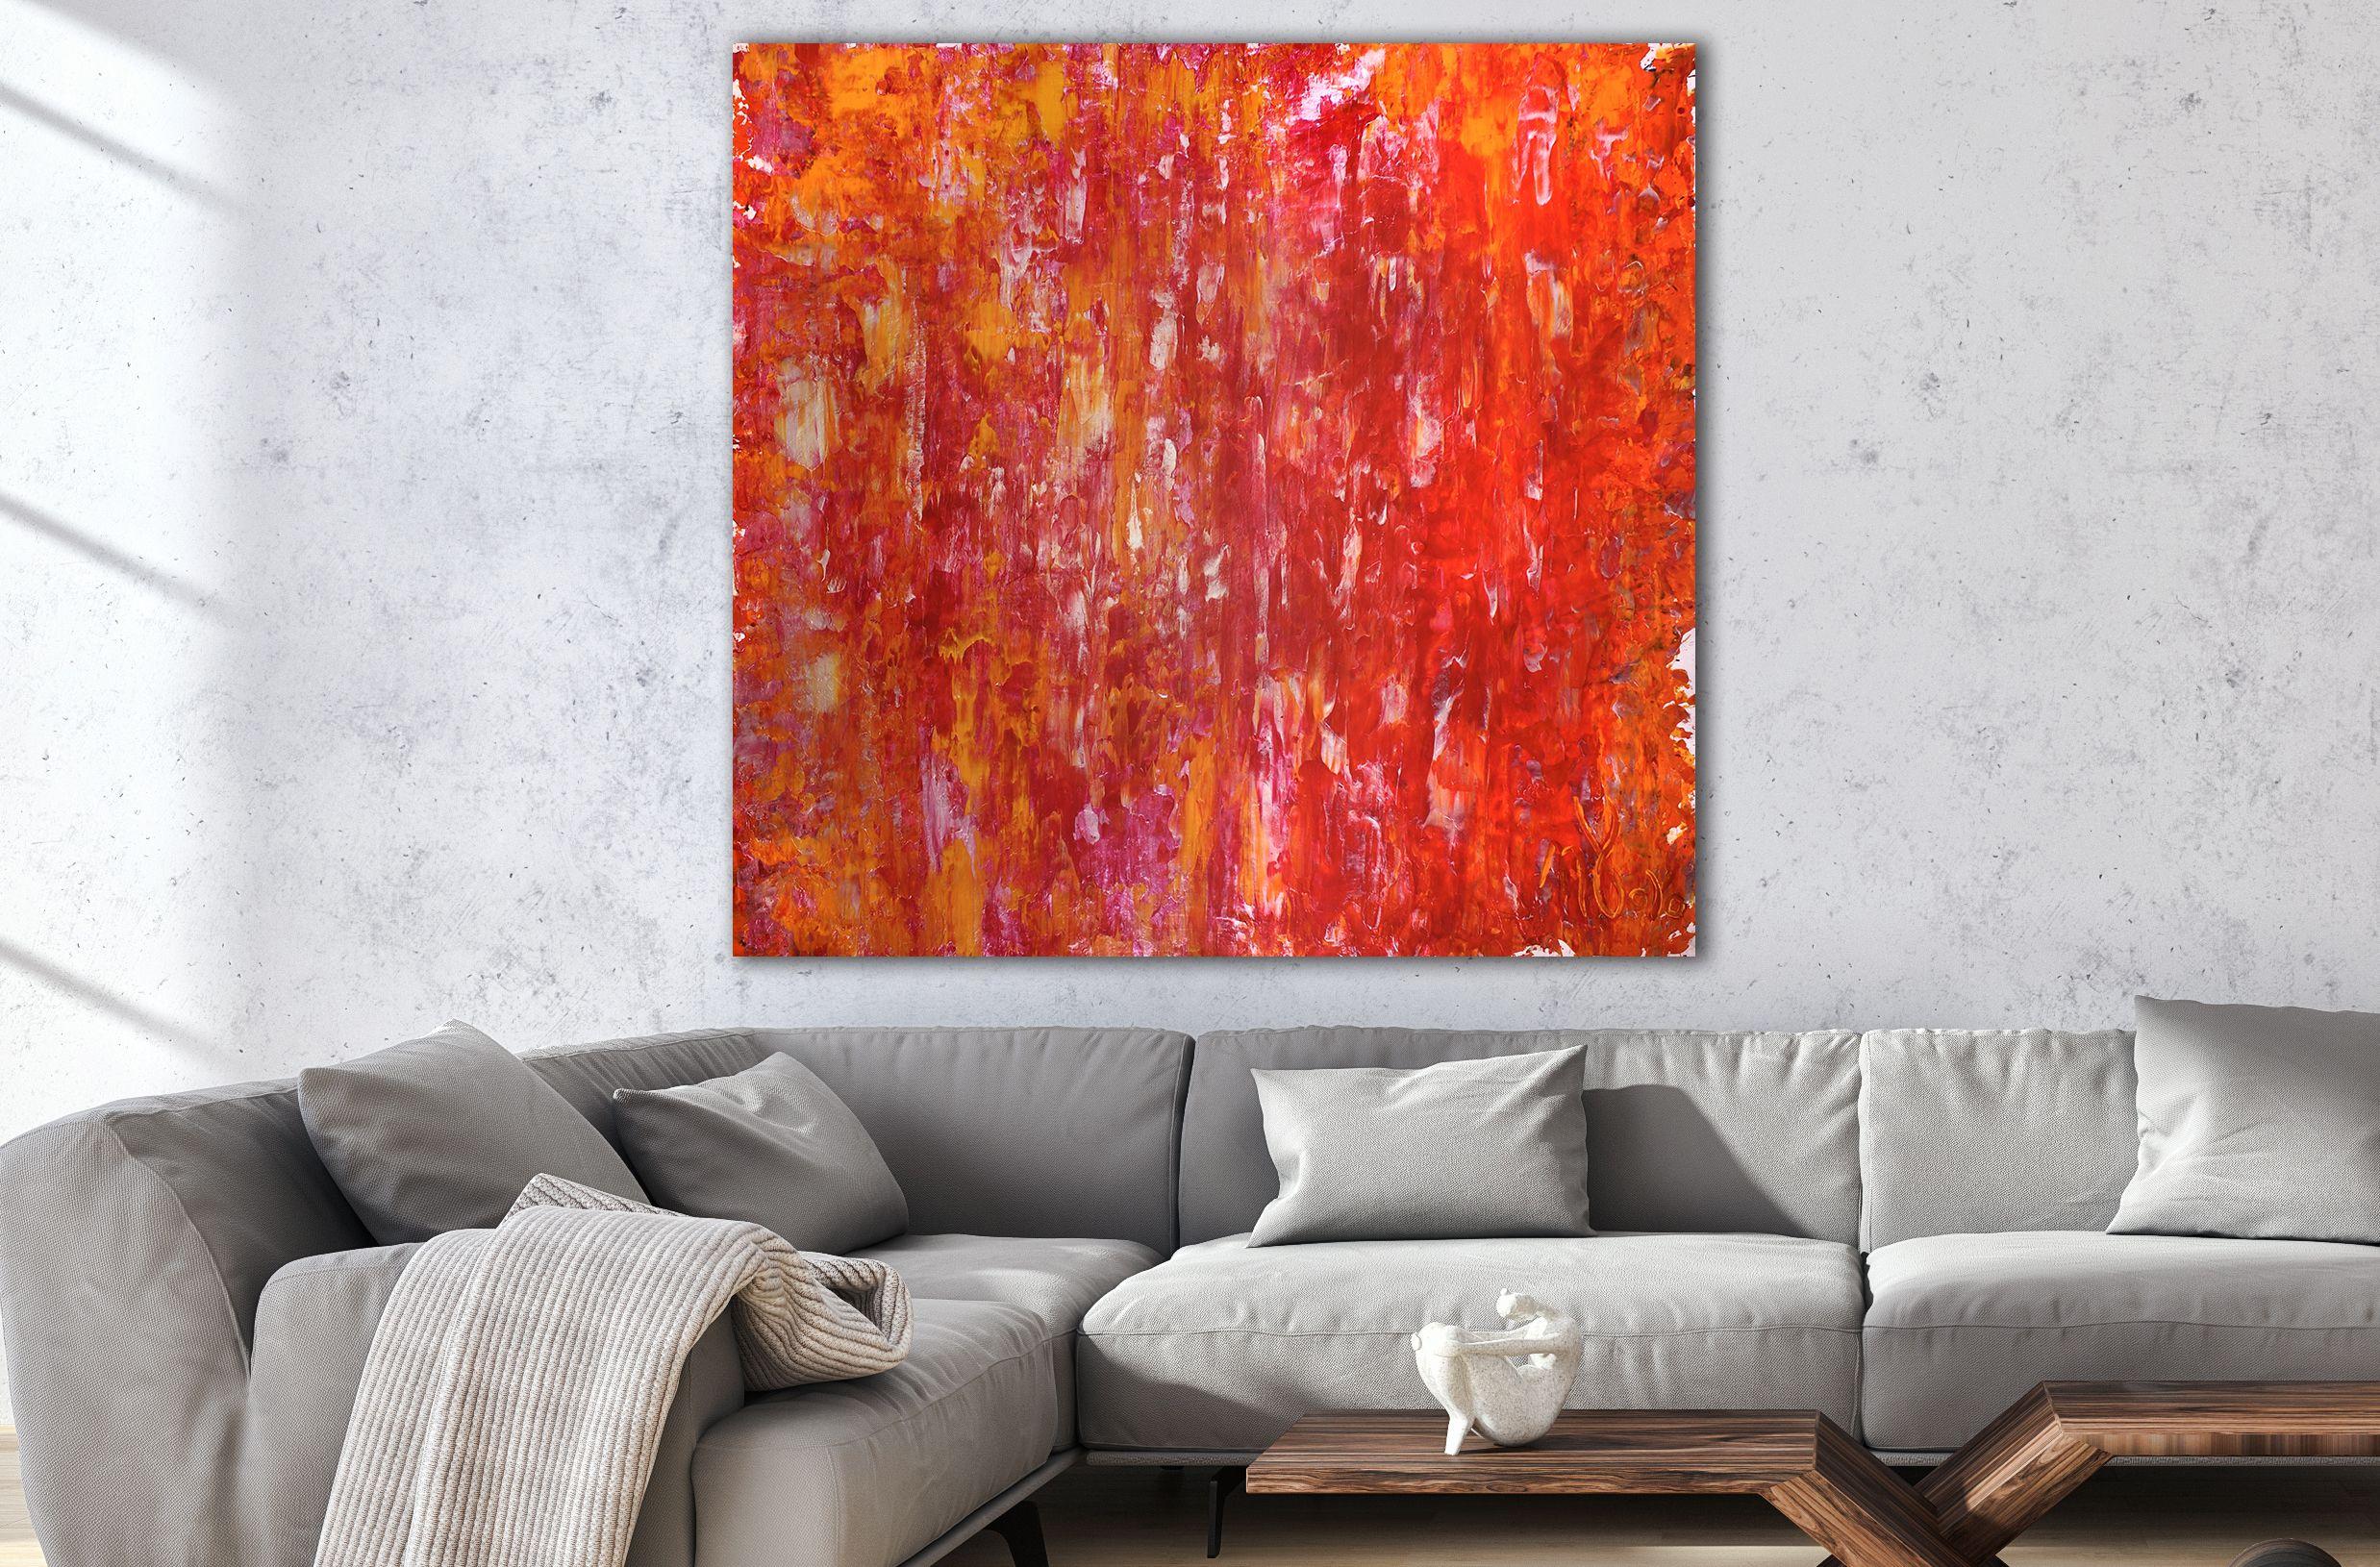 42Vibrant piece with bold color blending, Iridescent paint drips and big palette knife strokes. This painting conveys motion, energy as well as lots of light and fast changes in contrast. Make me think of a cornucopia of pink, yellow and red paint.